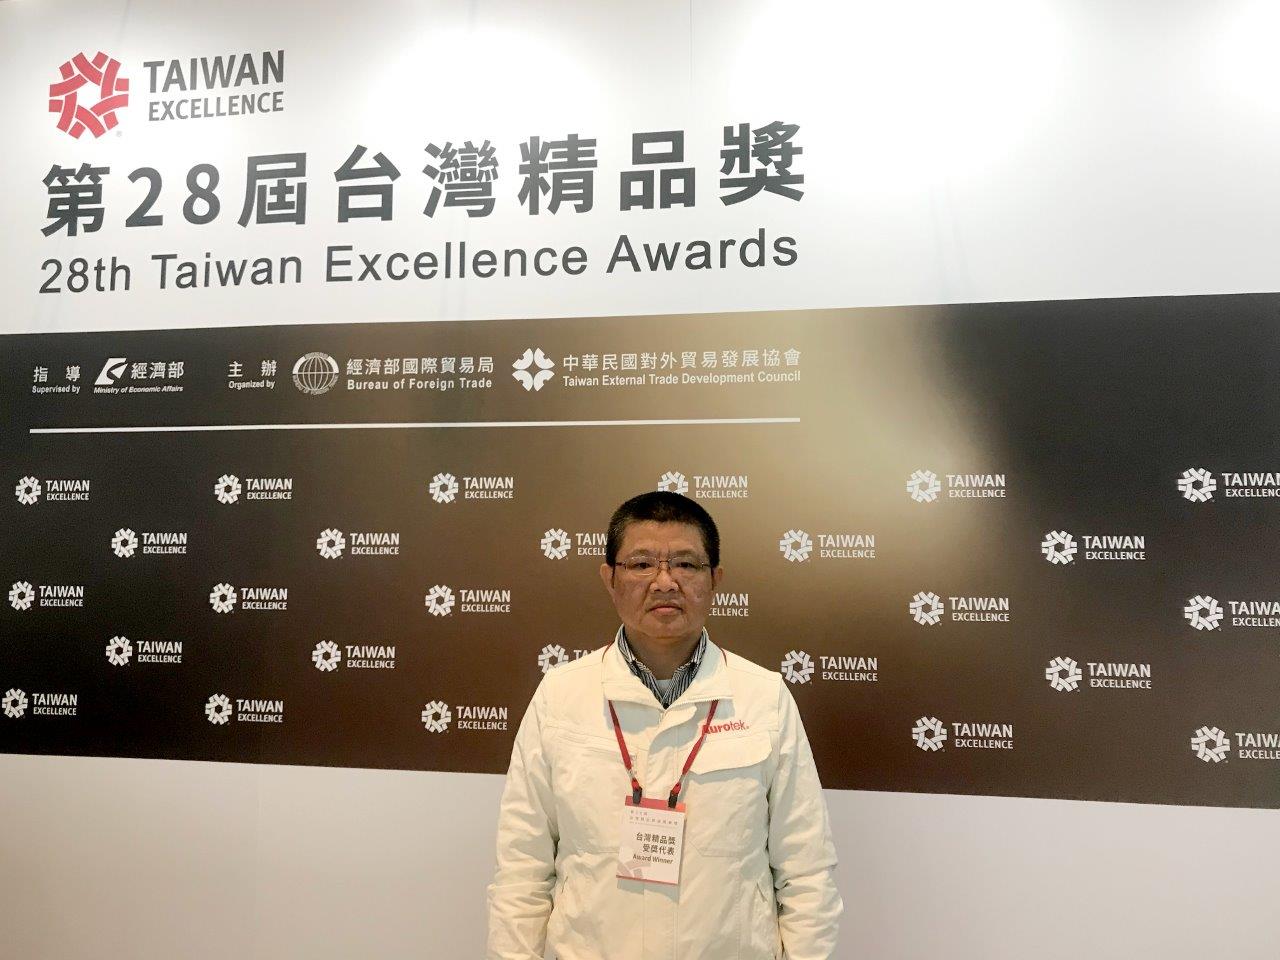 The 28th Taiwan Excellence Awards Ceremony